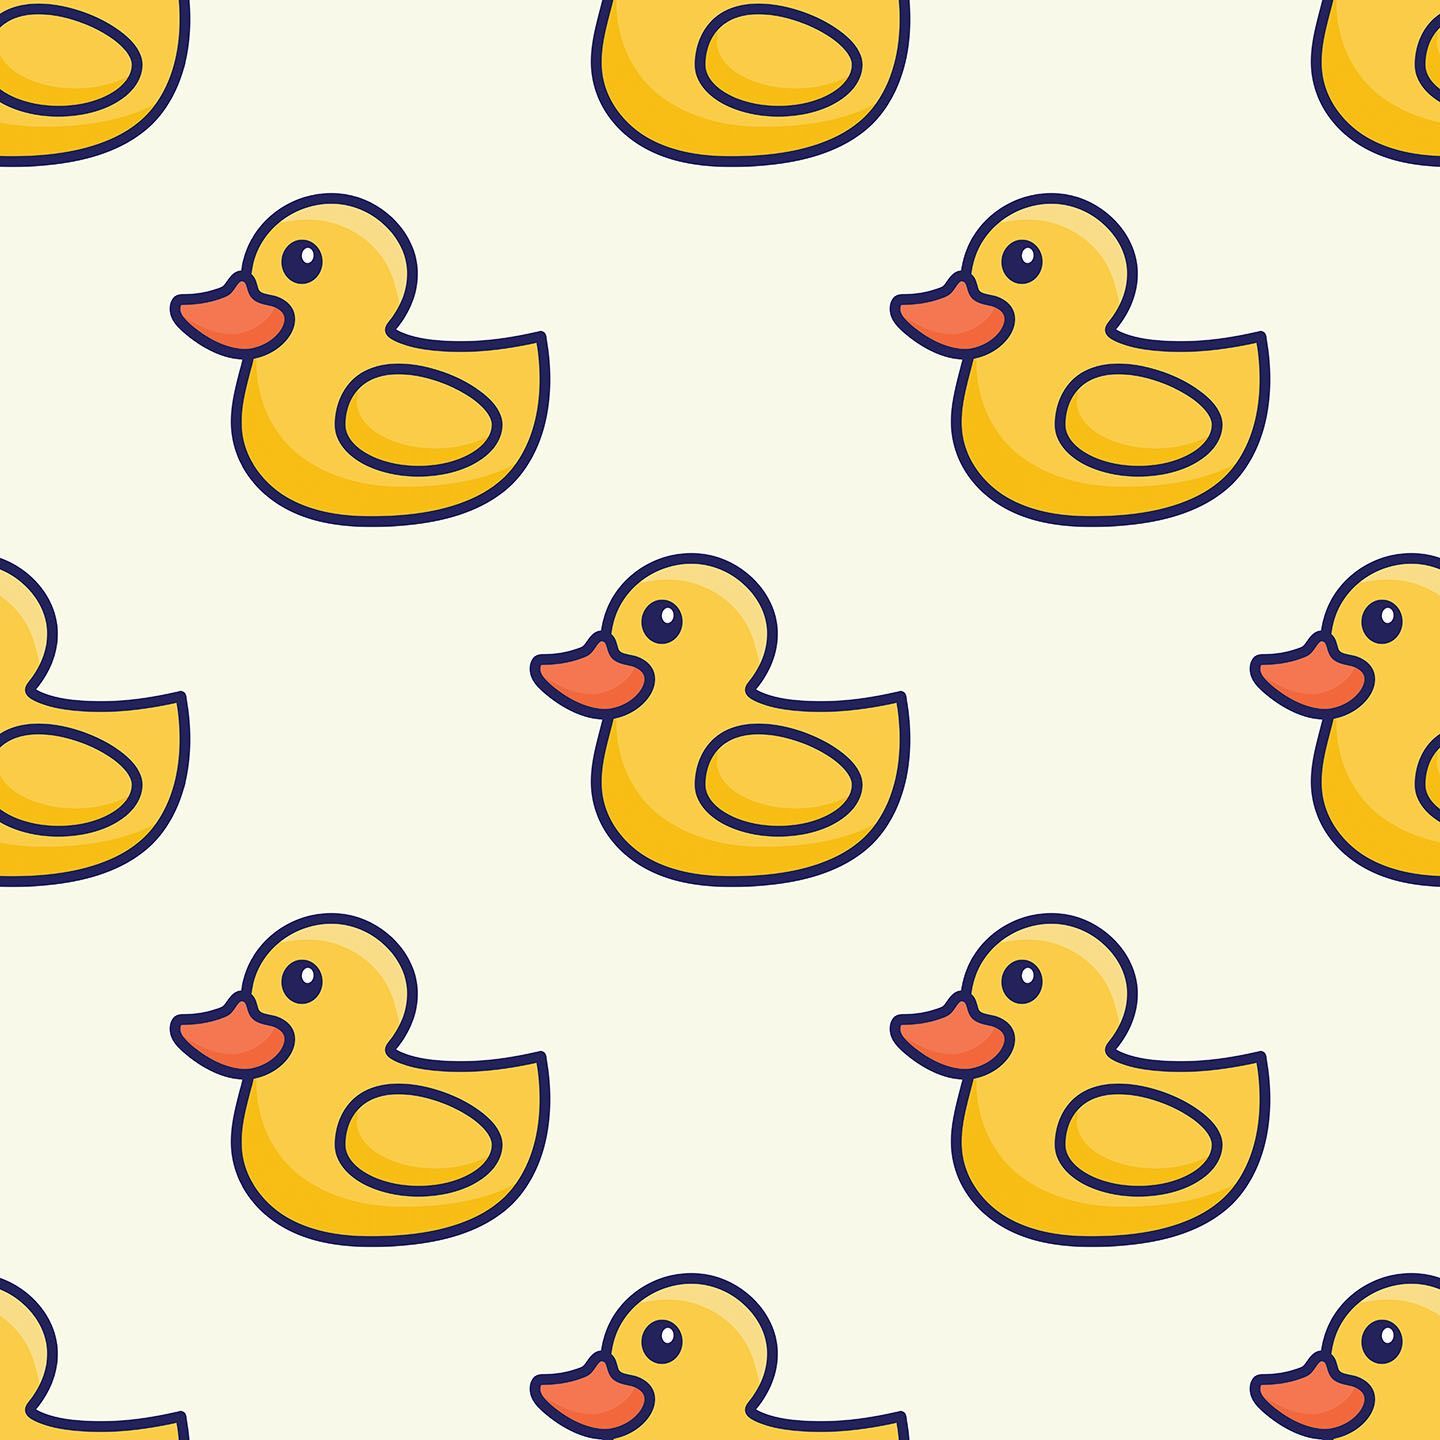 Duck Wallpaper And Stick Or Non Pasted. Save 25%